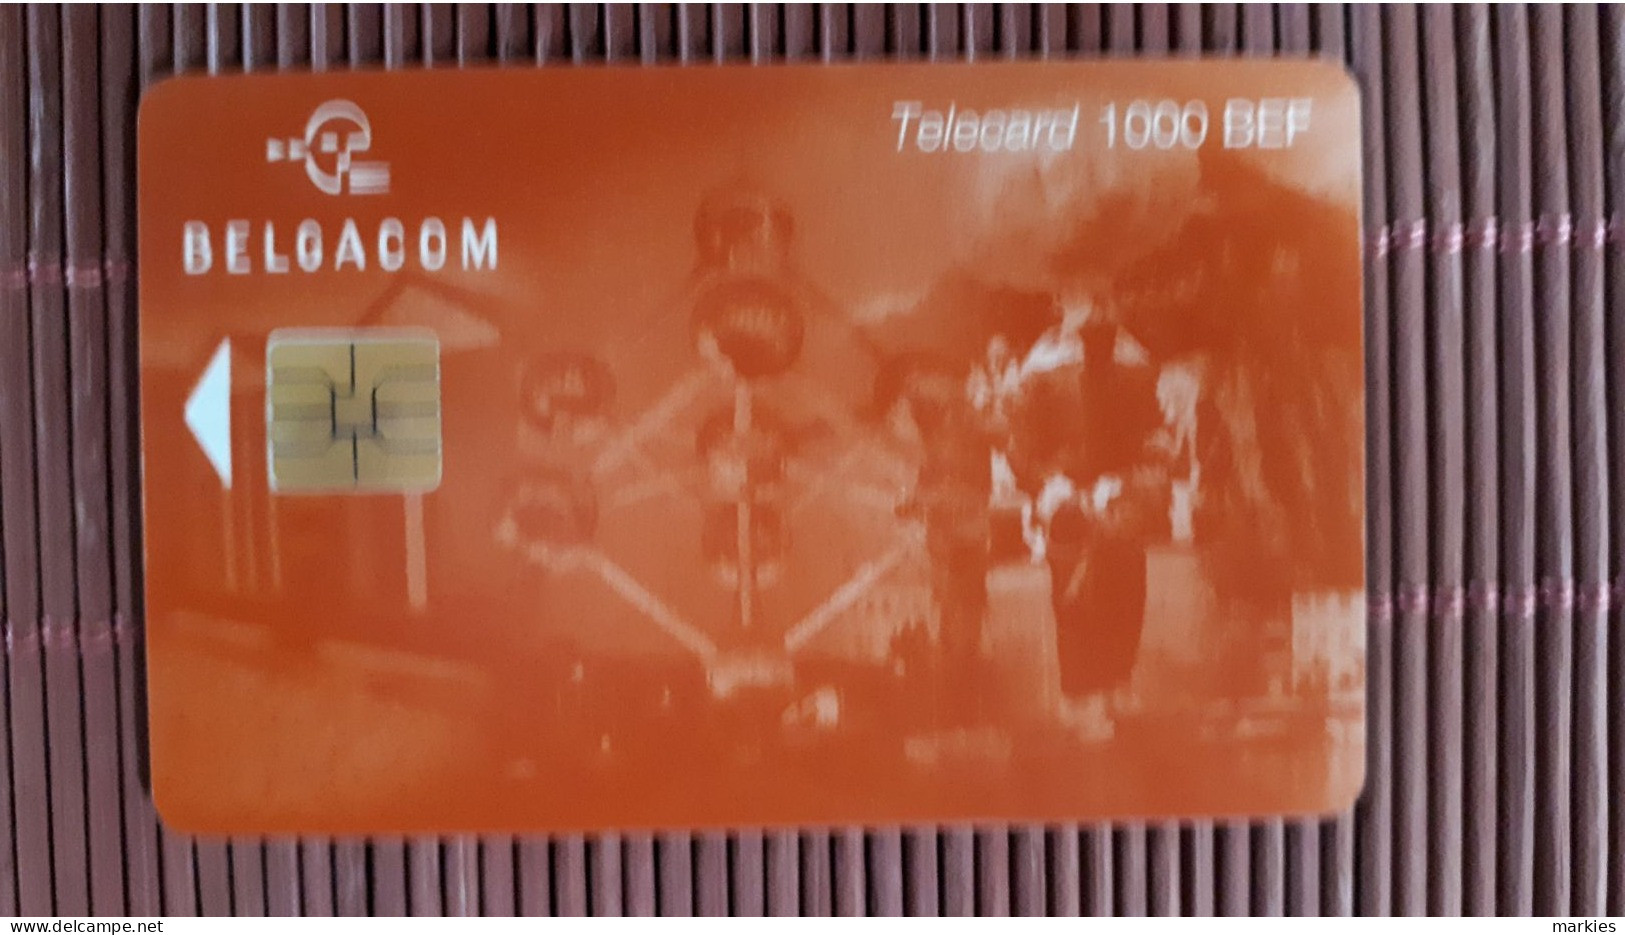 Phonecard Atomium 1000 BEF Used II 31.03.2002 Only 15.000 Ex Made Rare - Mit Chip